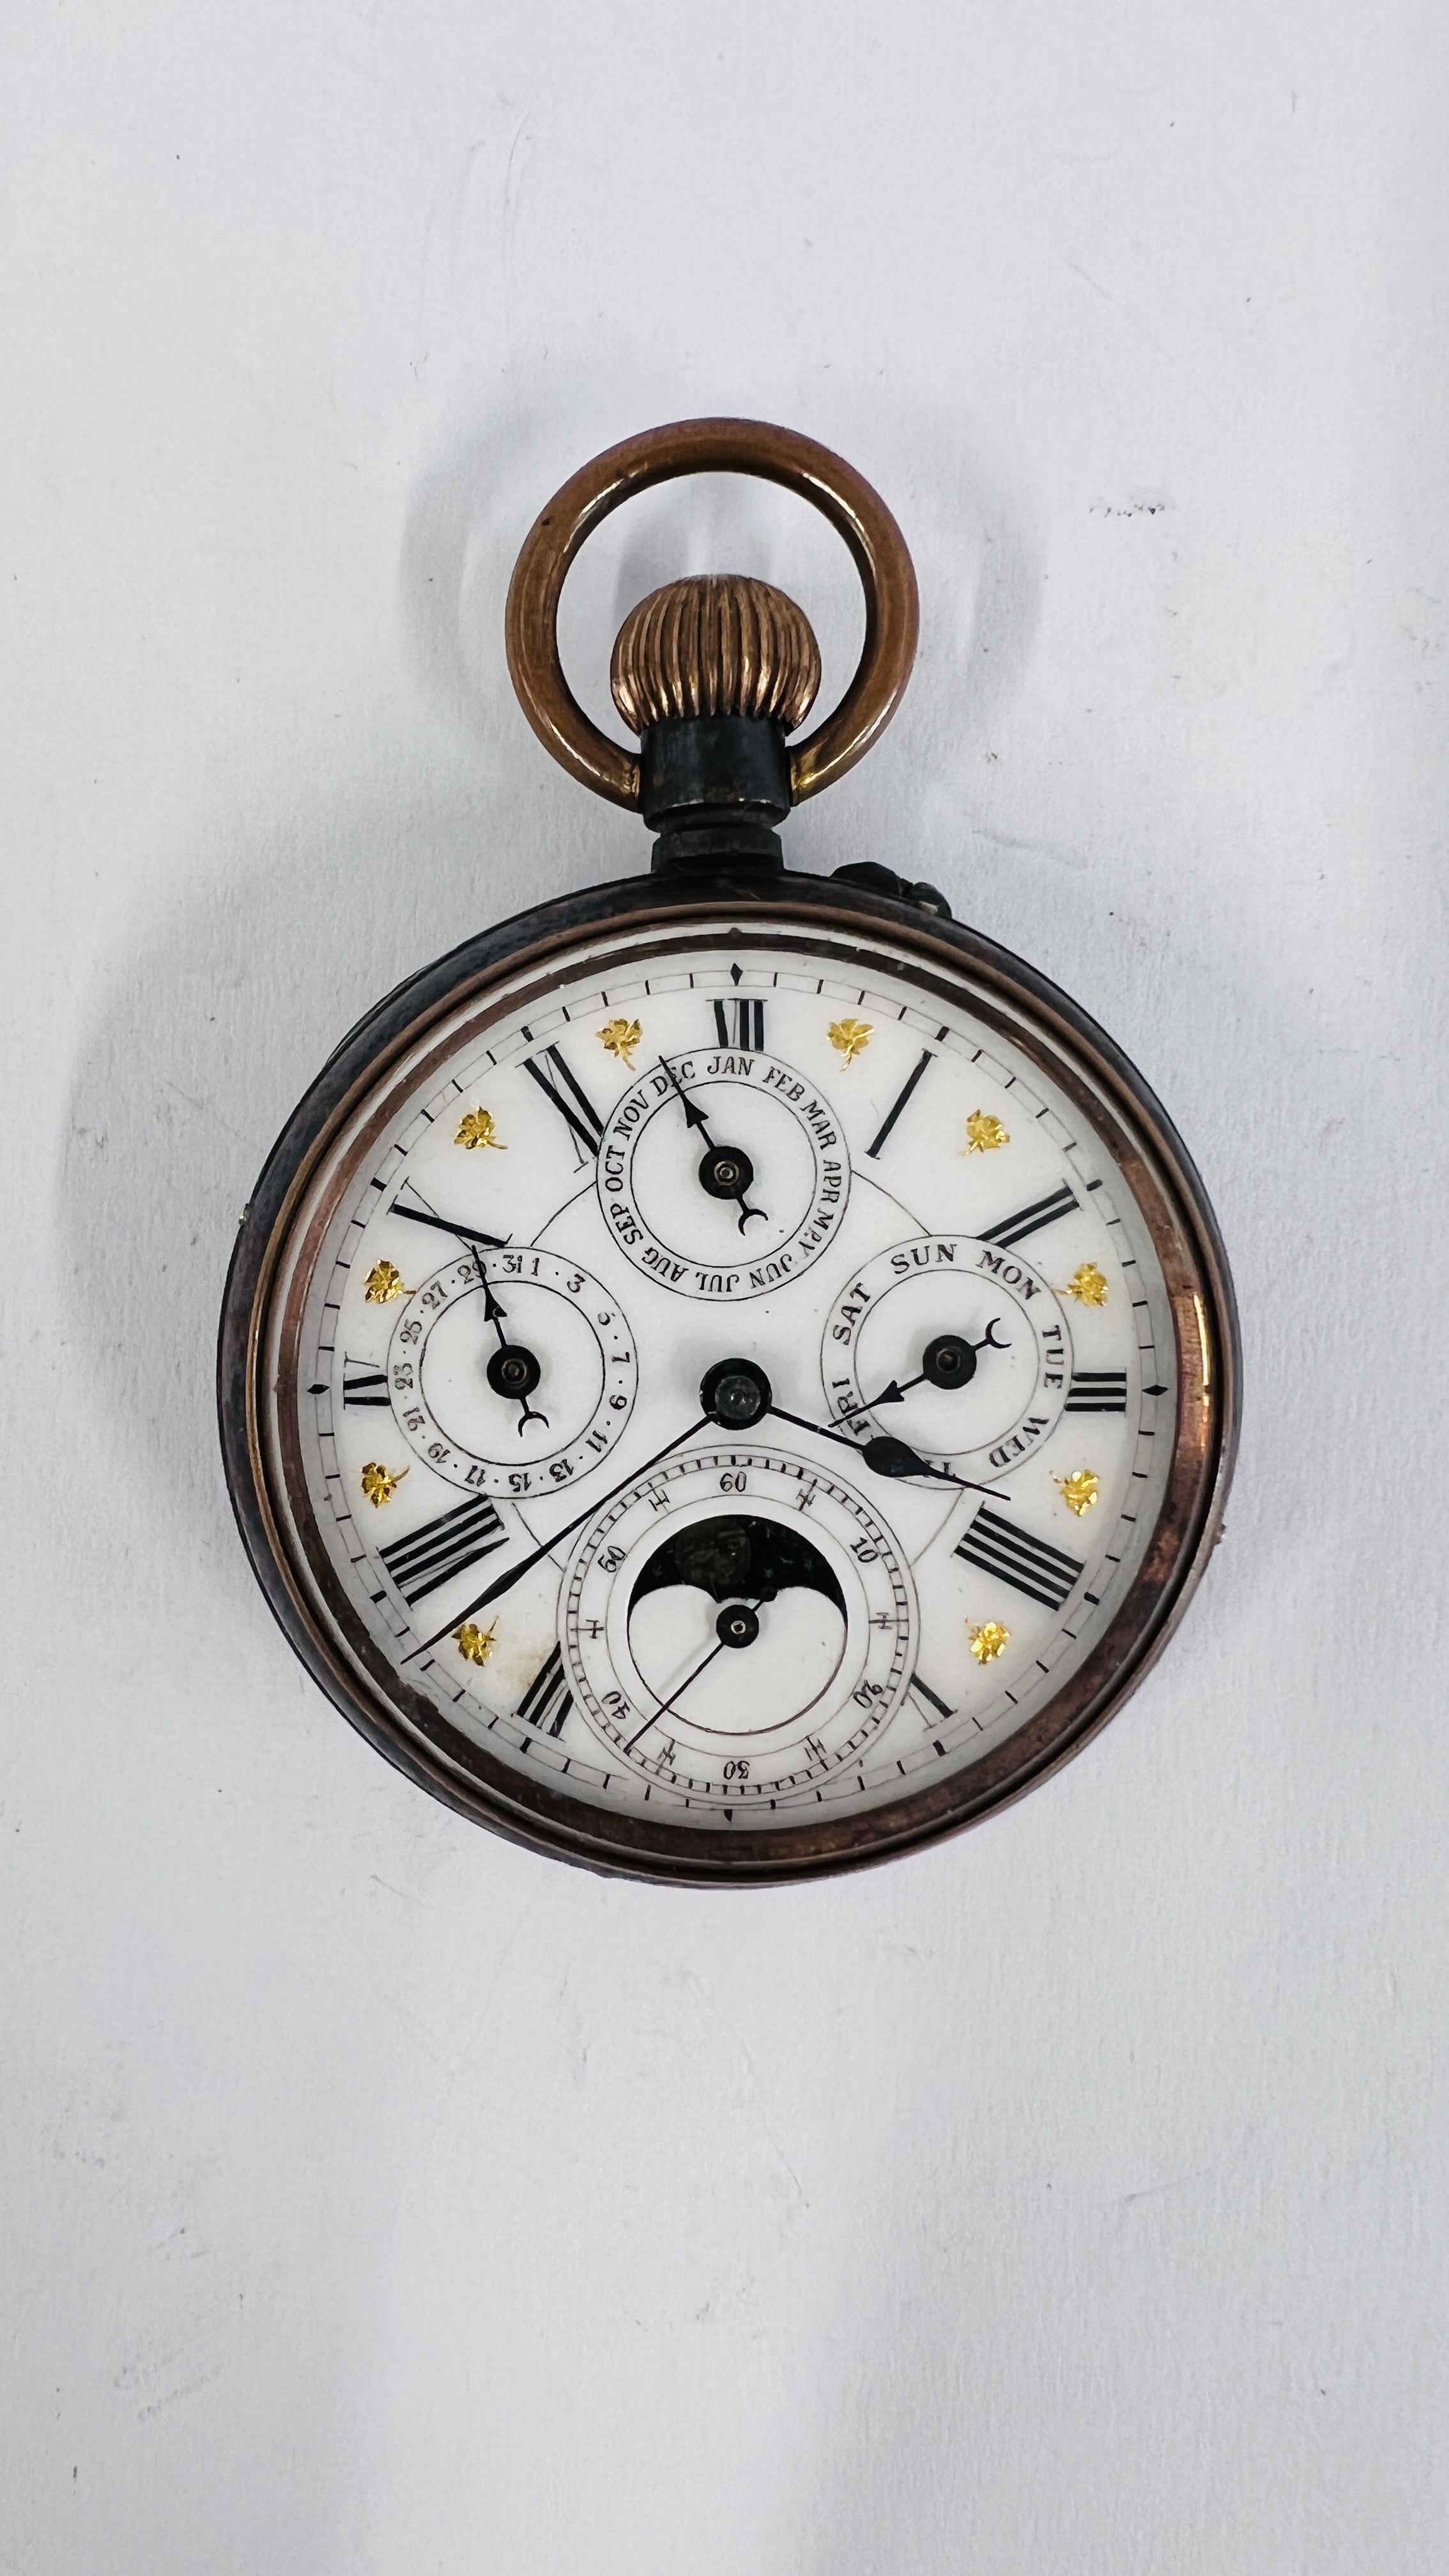 AN ACIER GARANTI SWISS MOON PHASE POCKET WATCH WITH FOUR SUBSIDERY DIALS, - Image 2 of 12